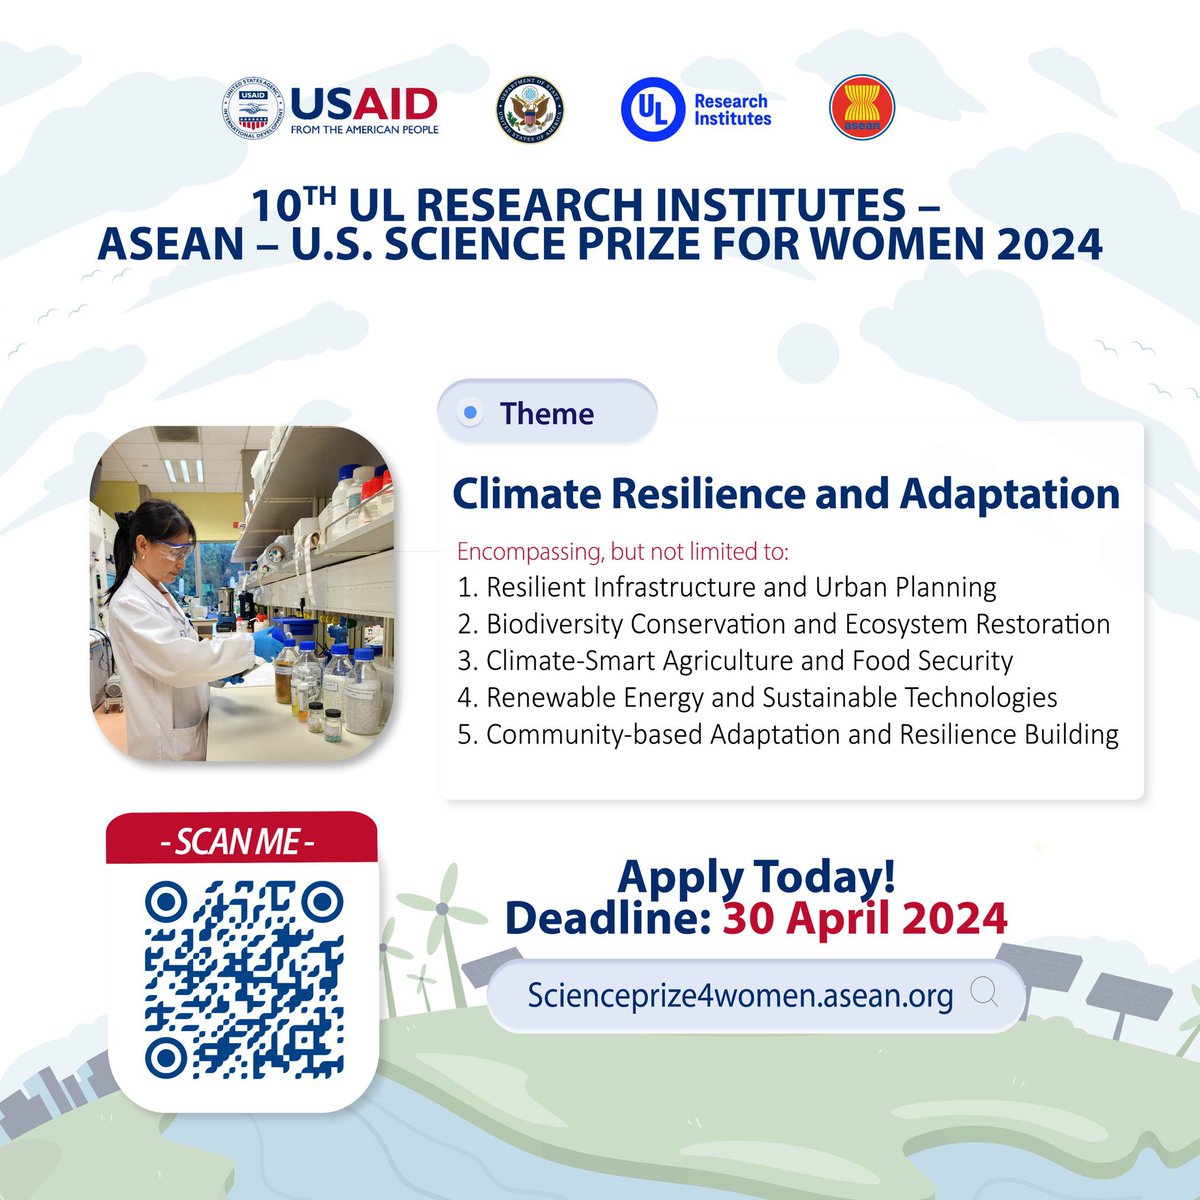 Launching the 10th Science Prize for Women with USAIDAsia, ULdialogue, & ASEAN!

This year's theme focuses on climate resilience & adaptation. Join us in driving innovation for a sustainable future. Apply now bit.ly/ASEAN_SPW2024

#USAIDASEAN #WomenInSTEM